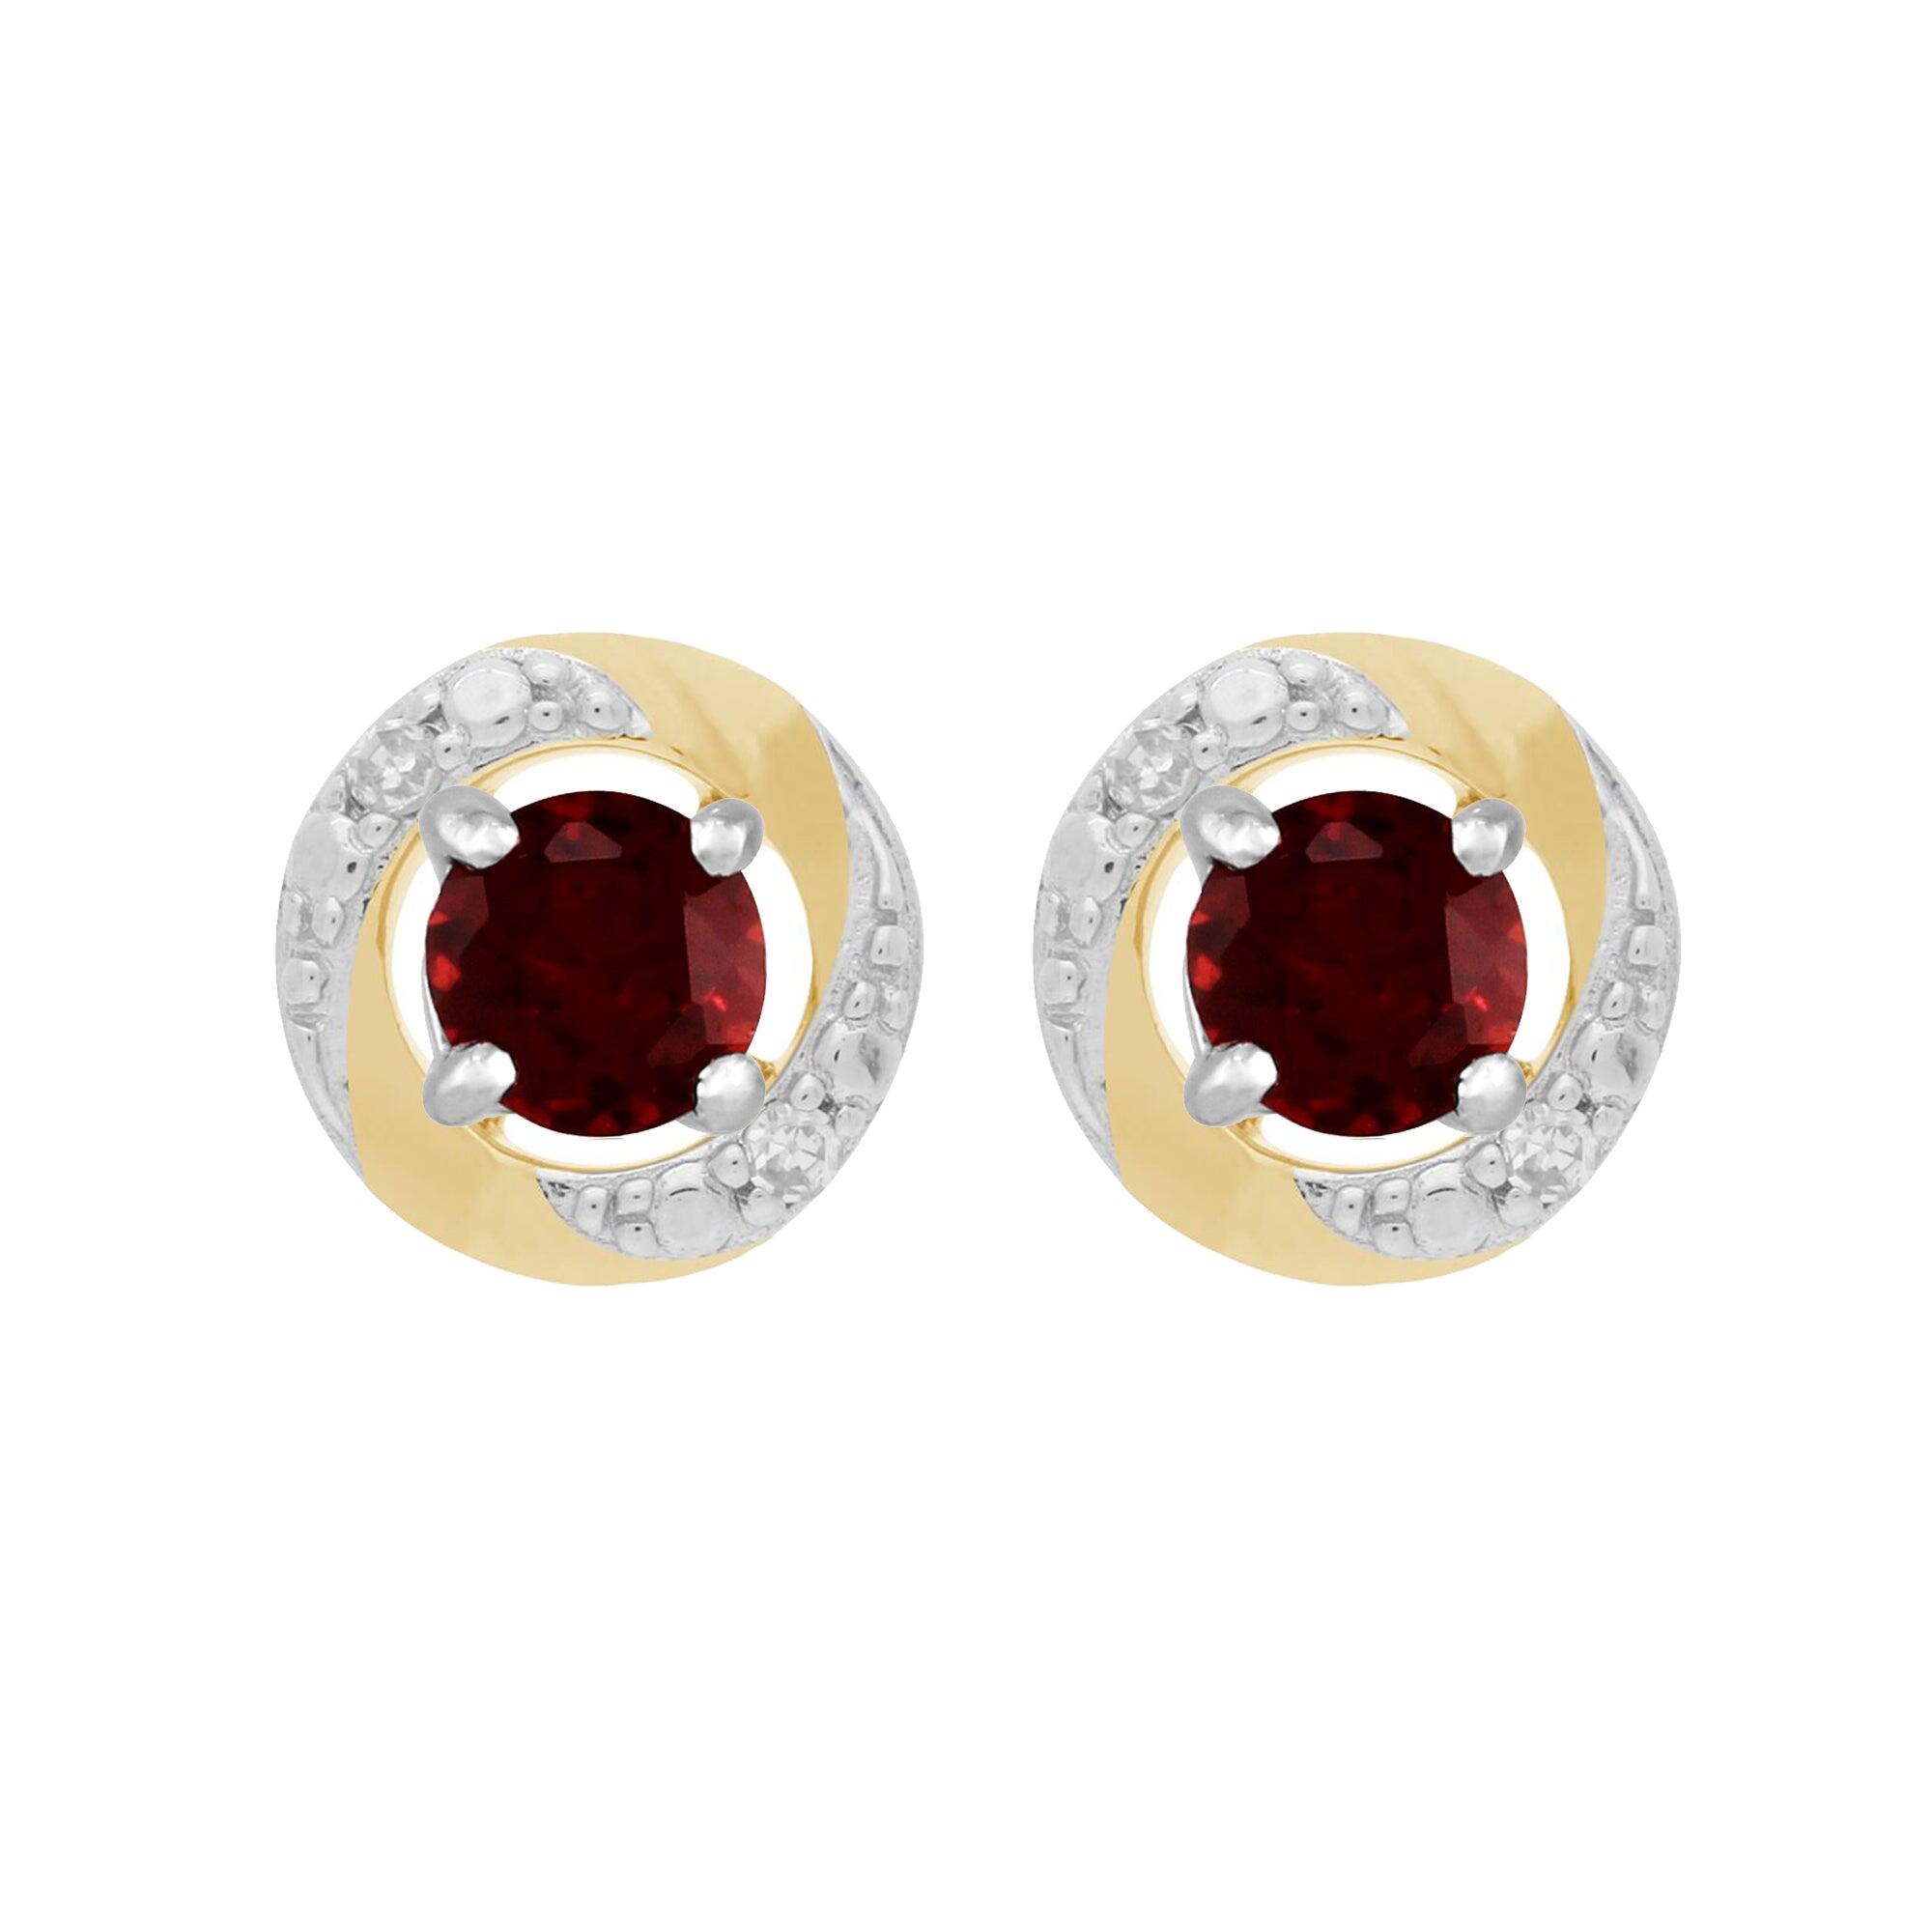 9ct White Gold Garnet Stud Earrings with Detachable Diamond Halo Ear Jacket in 9ct Yellow Gold